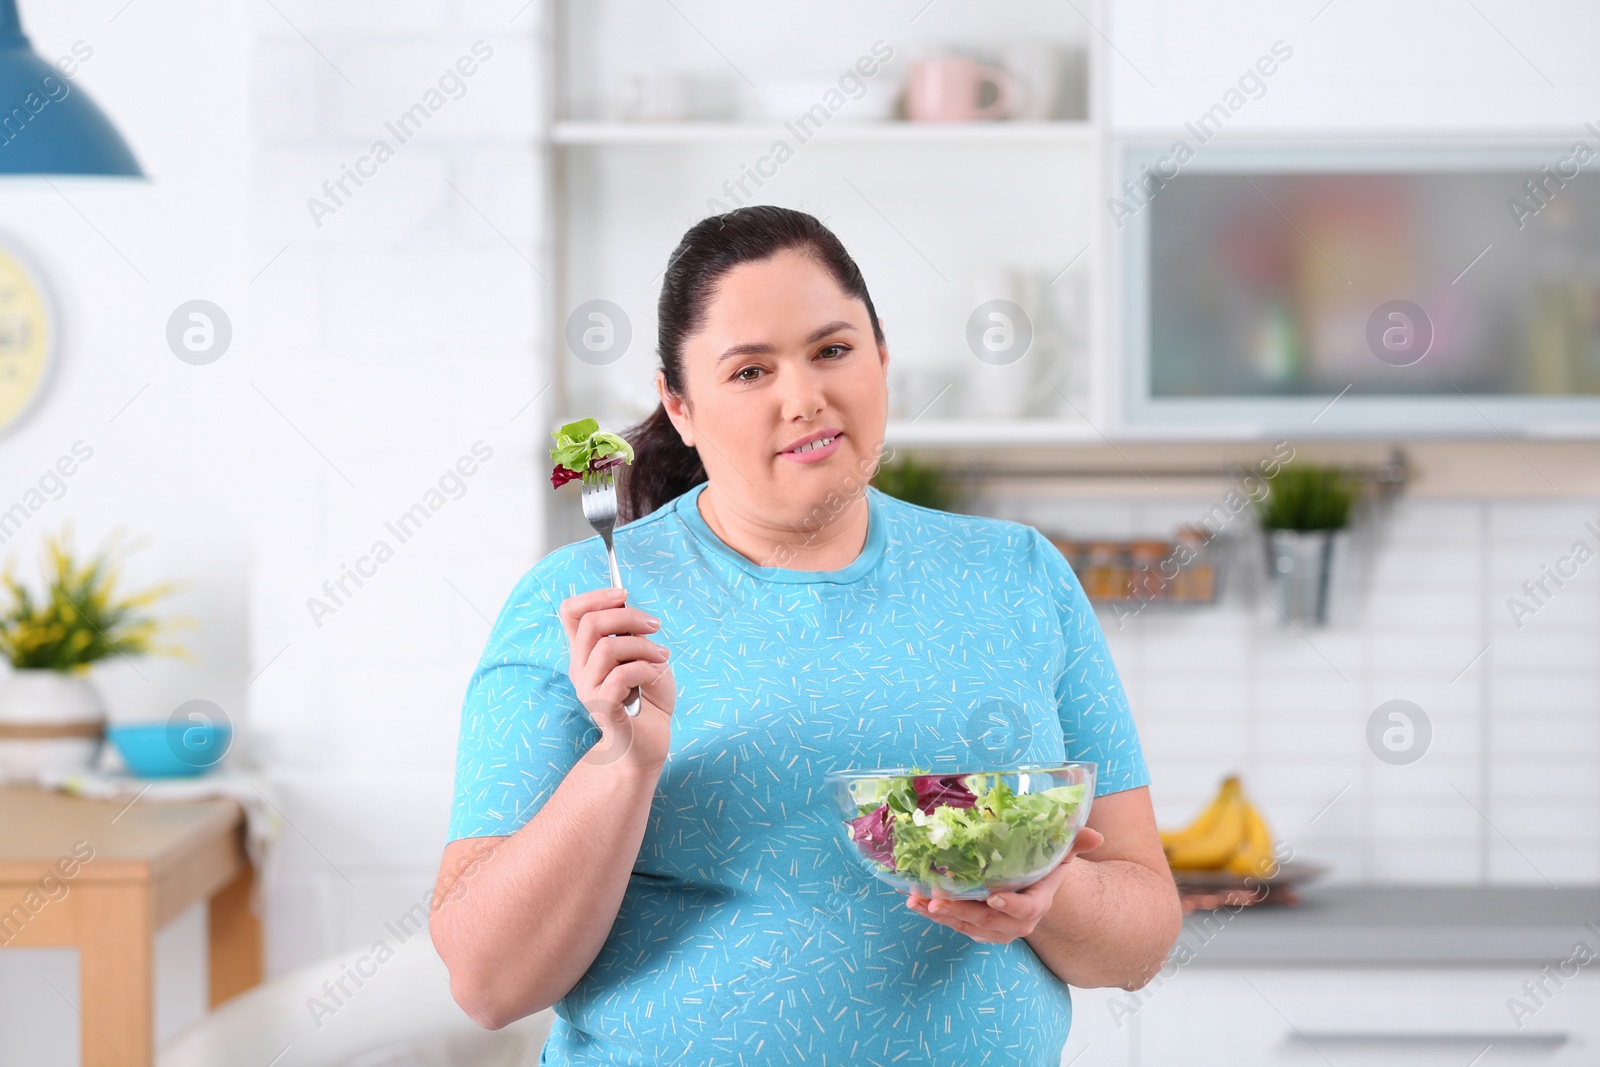 Photo of Overweight woman with bowl of salad in kitchen. Healthy diet